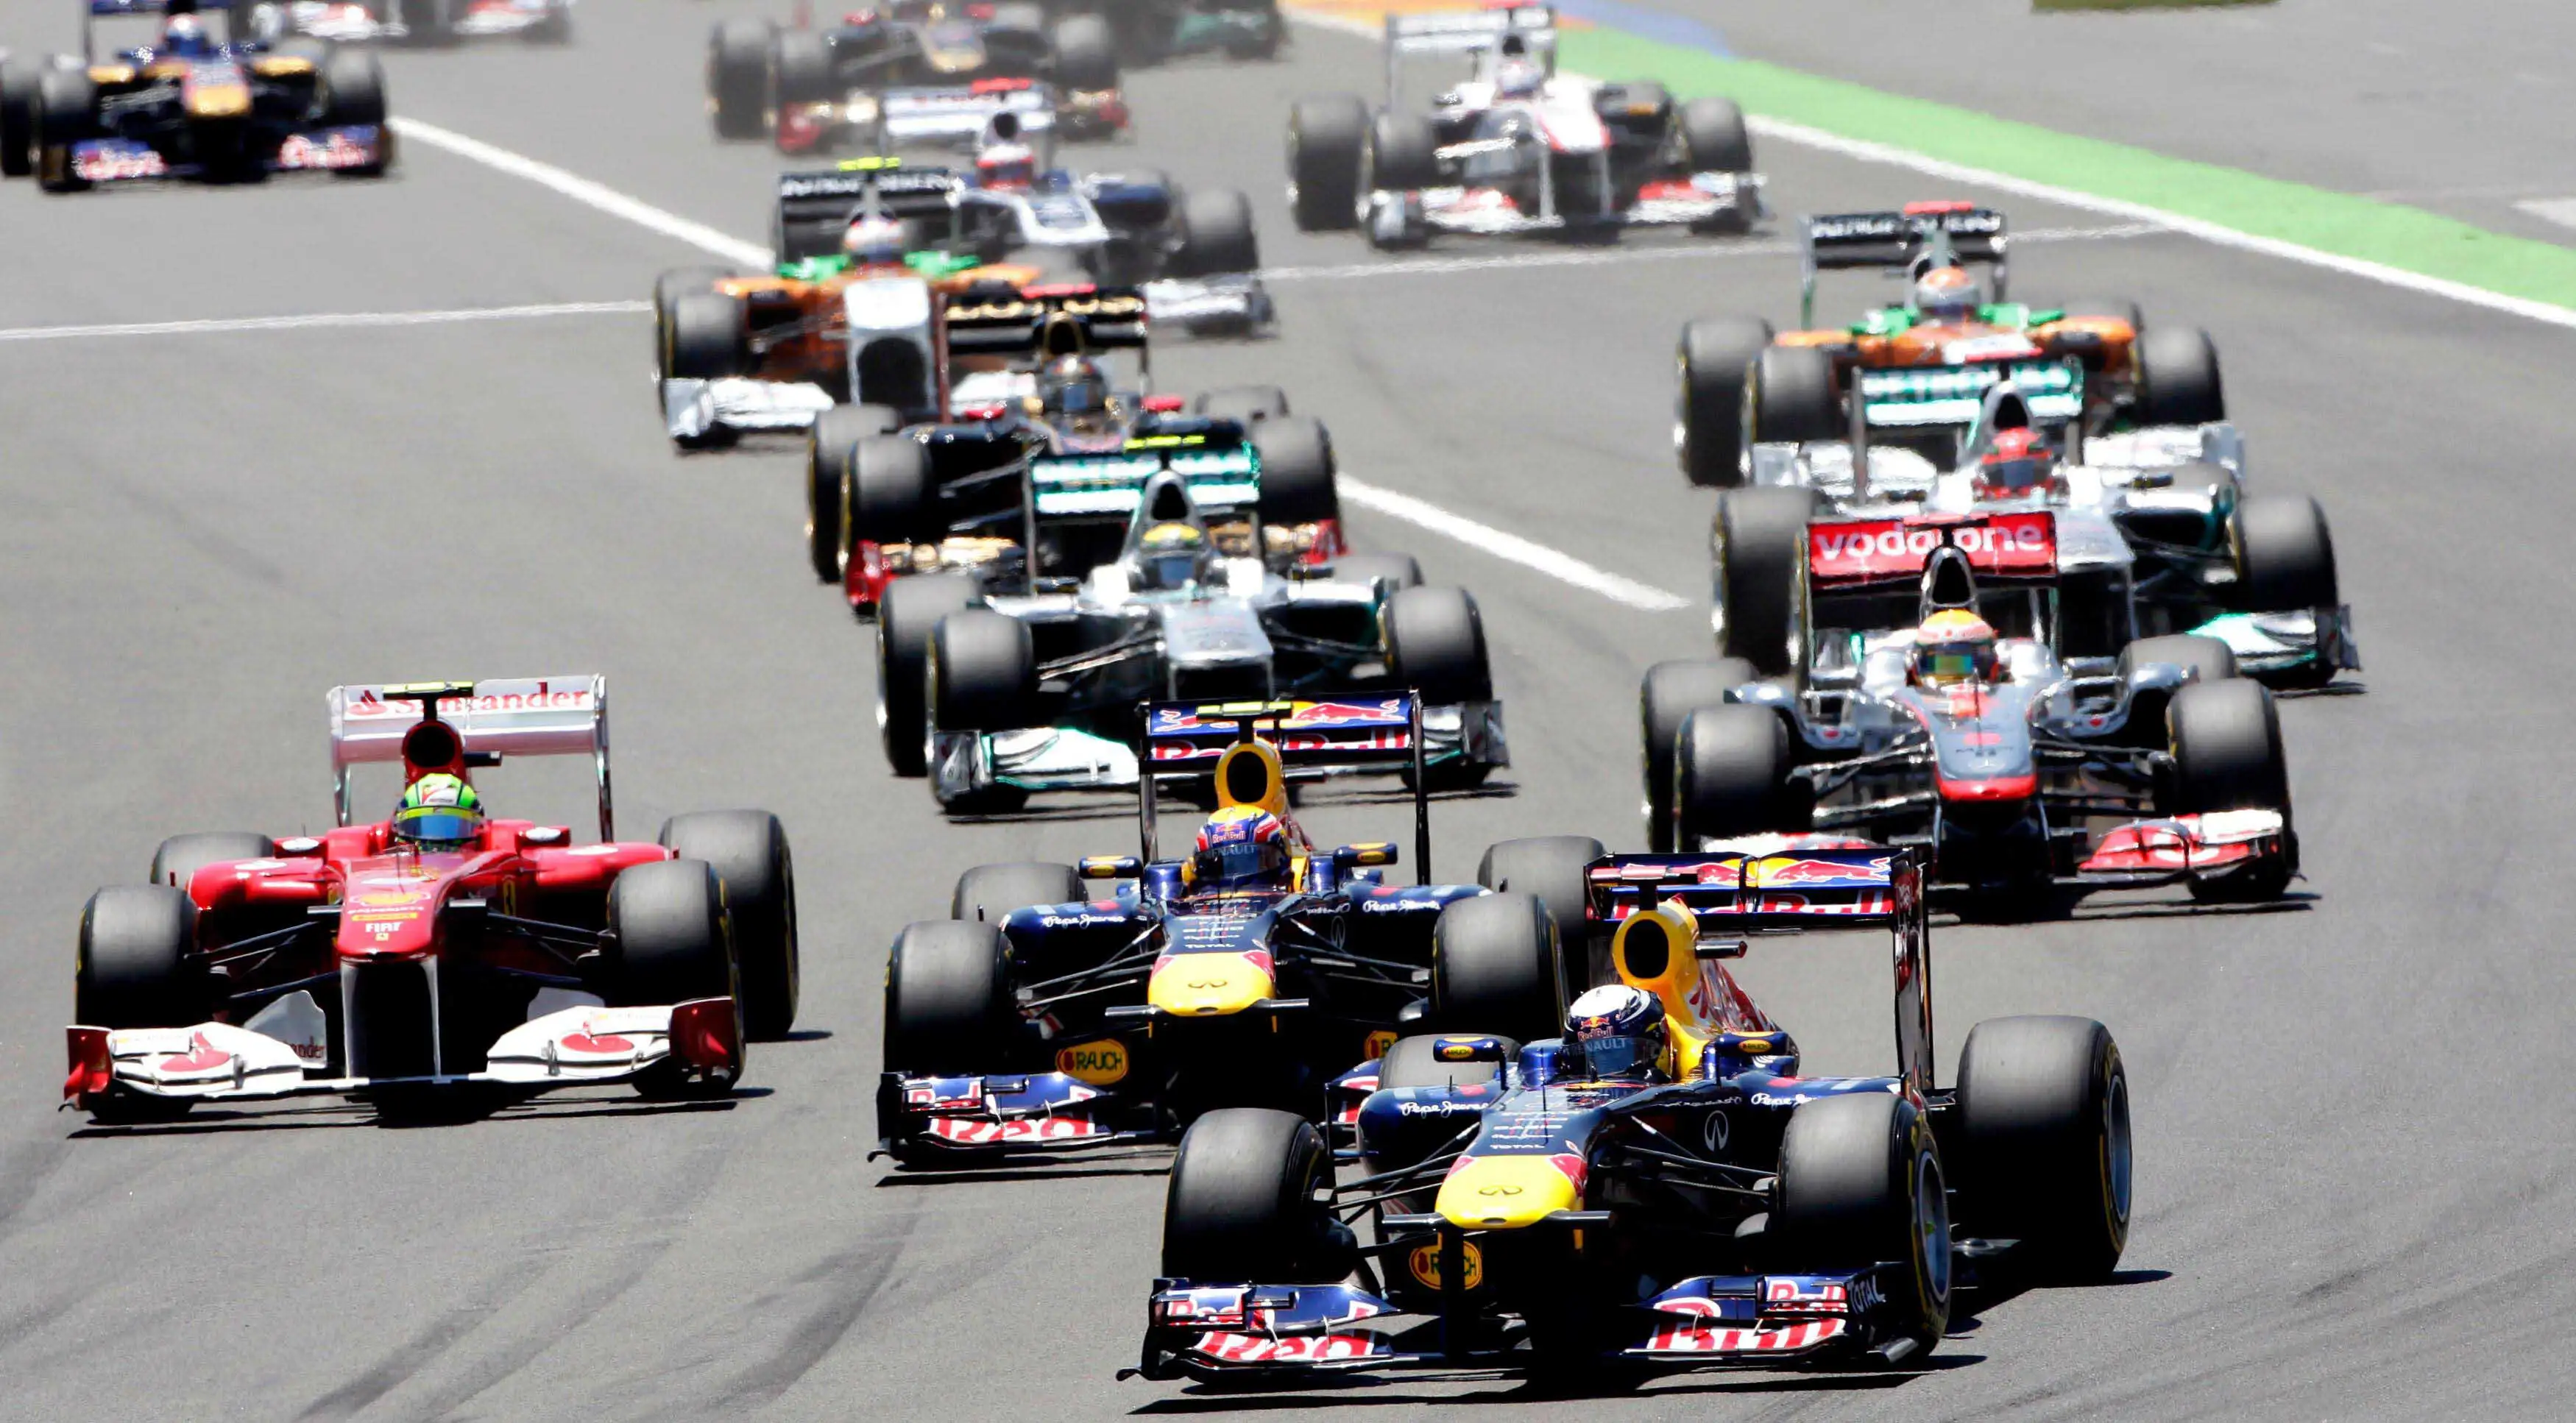 A general shot of the starting grid for the 2011 European Grand Prix. Valencia 2011